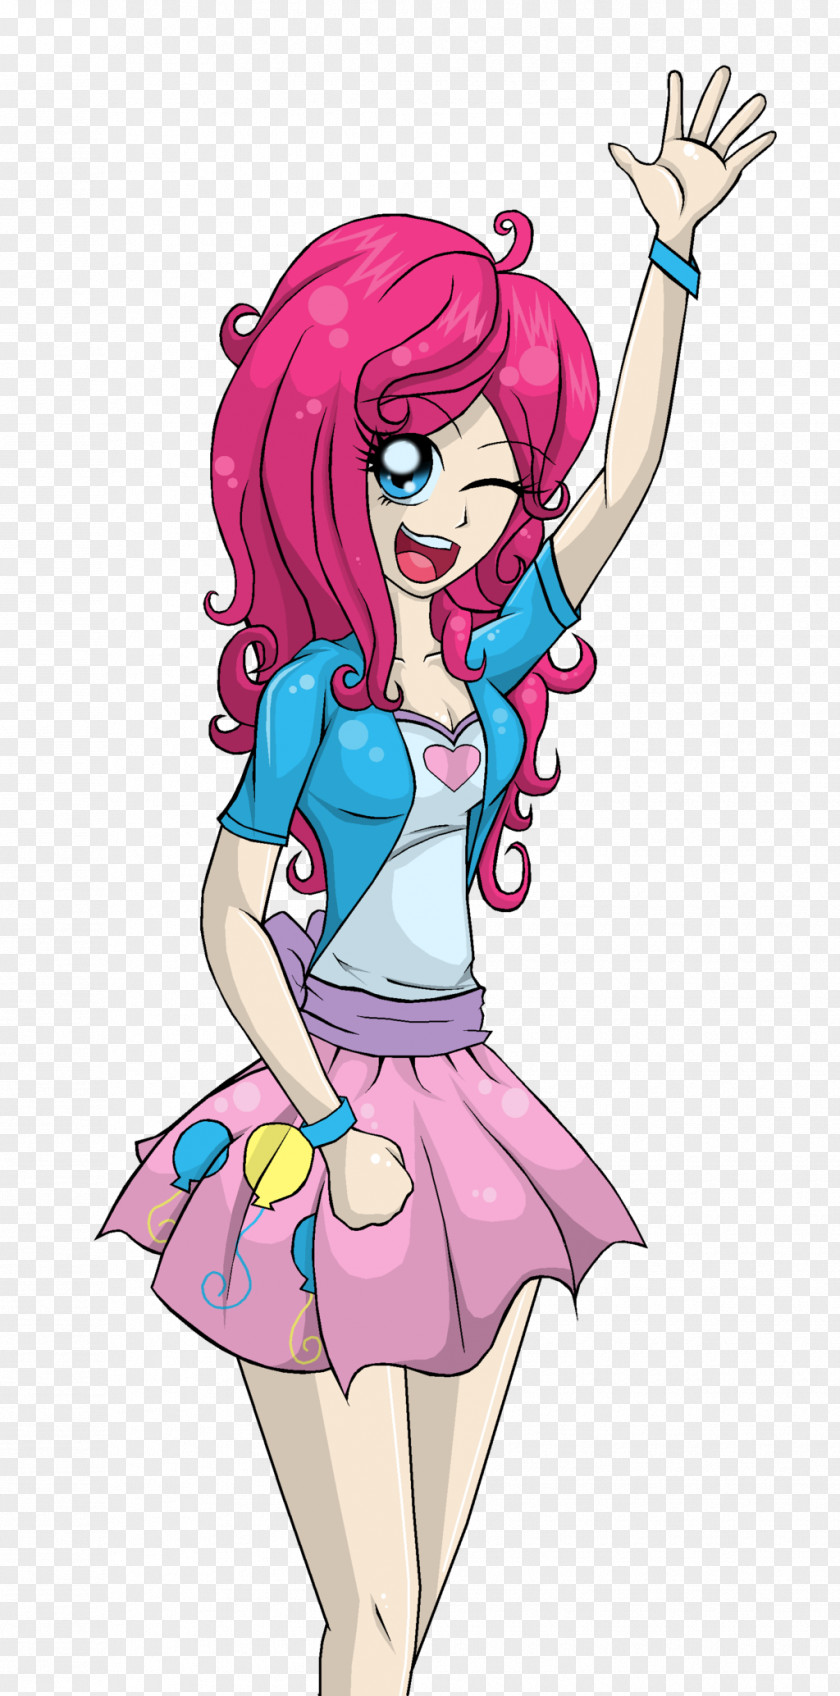 Lovely Expression Pinkie Pie Rainbow Dash Rarity My Little Pony: Equestria Girls PNG